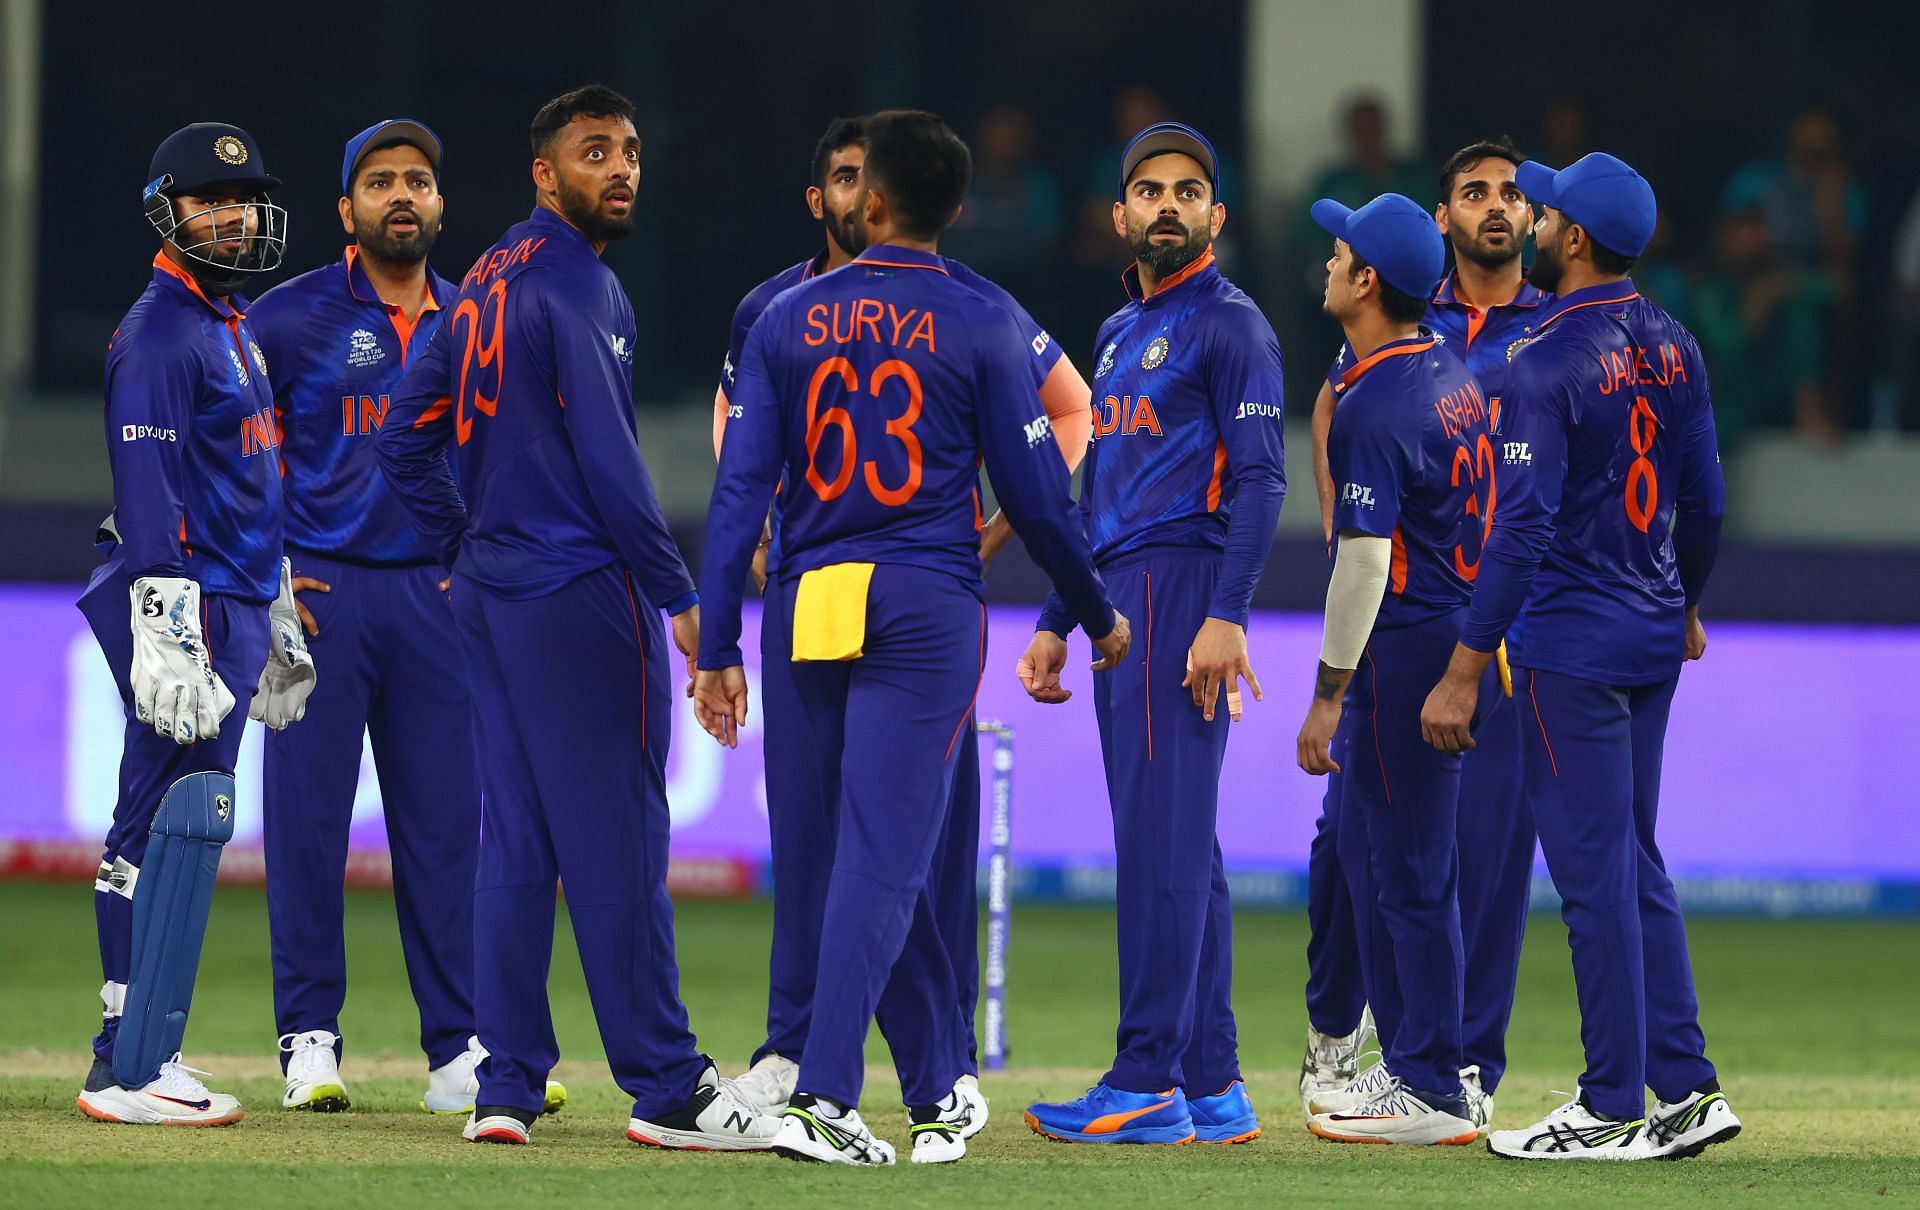 The Indian cricket team has earned a direct entry to the 2022 ICC T20 World Cup Super 12 round